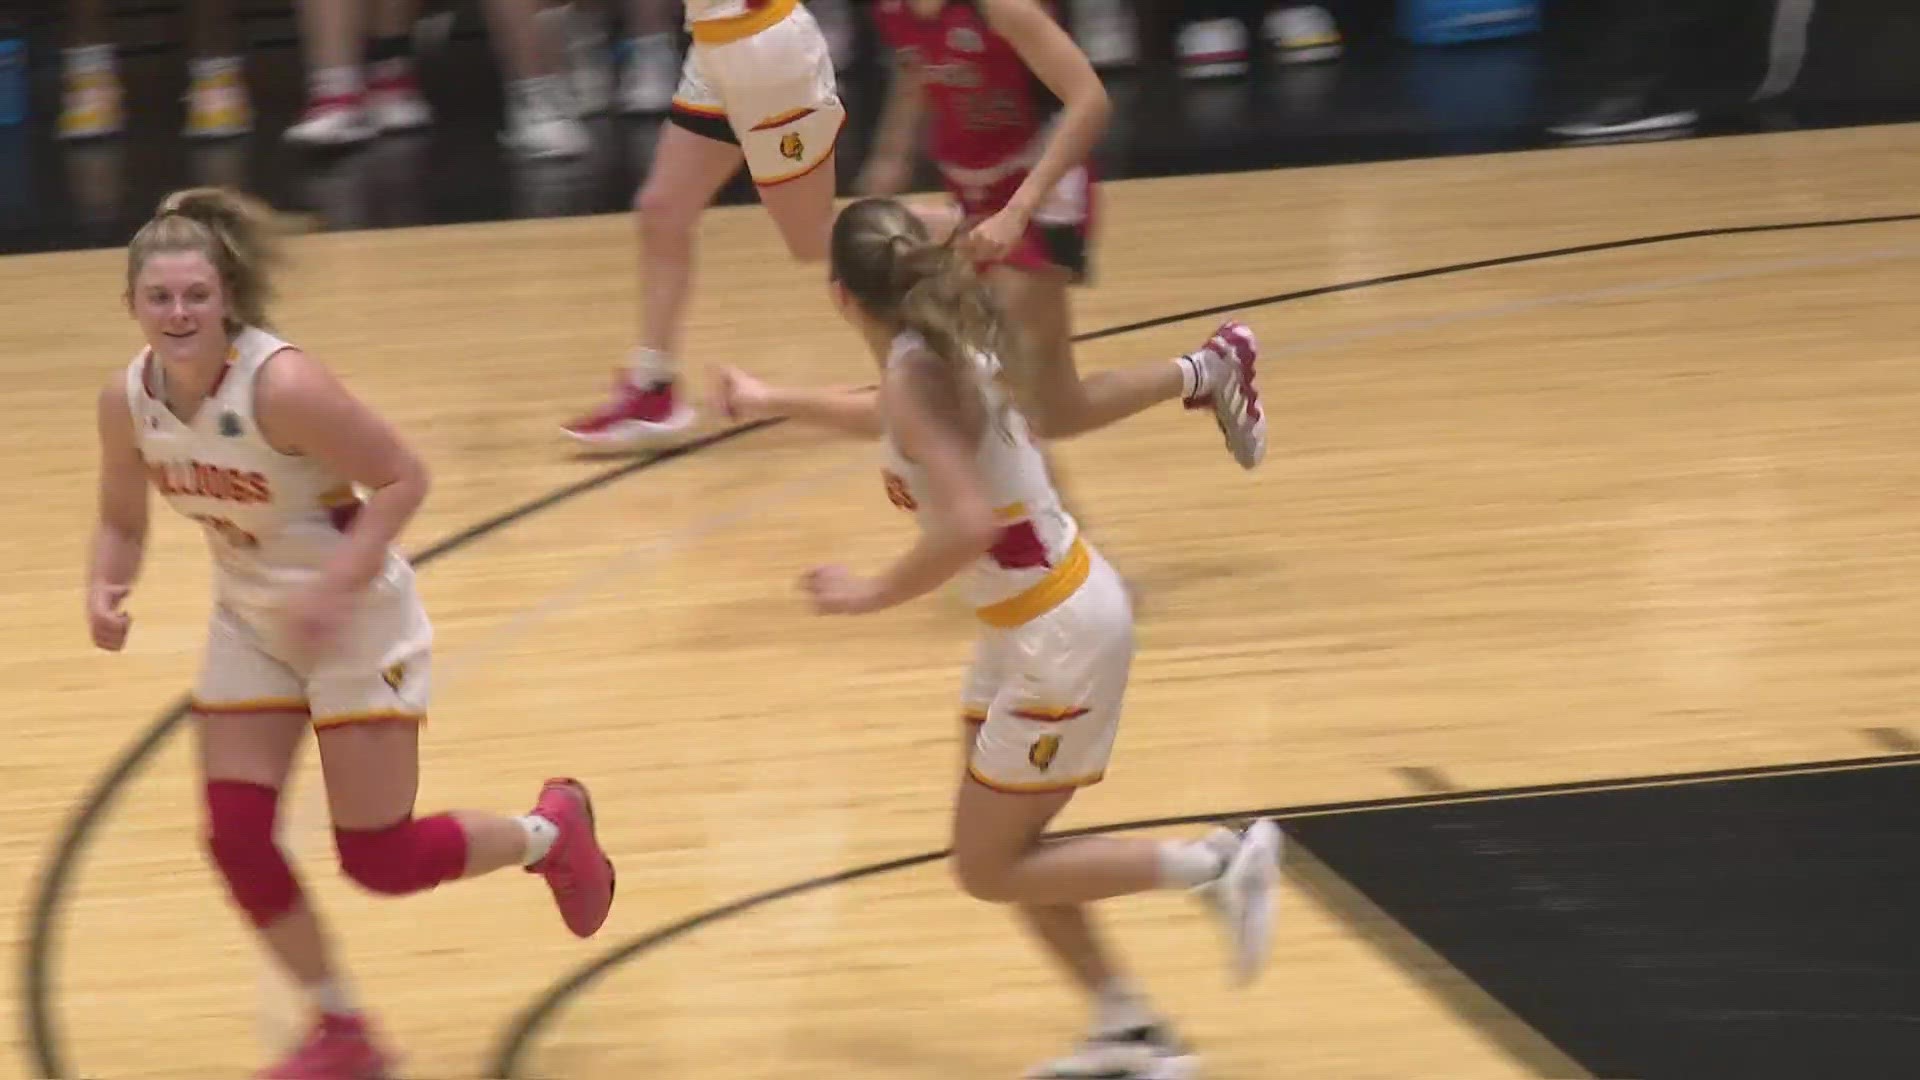 #3 Ferris State wins first NCAA Tournament game in 12 years 75-53 over # 6 Lewis.